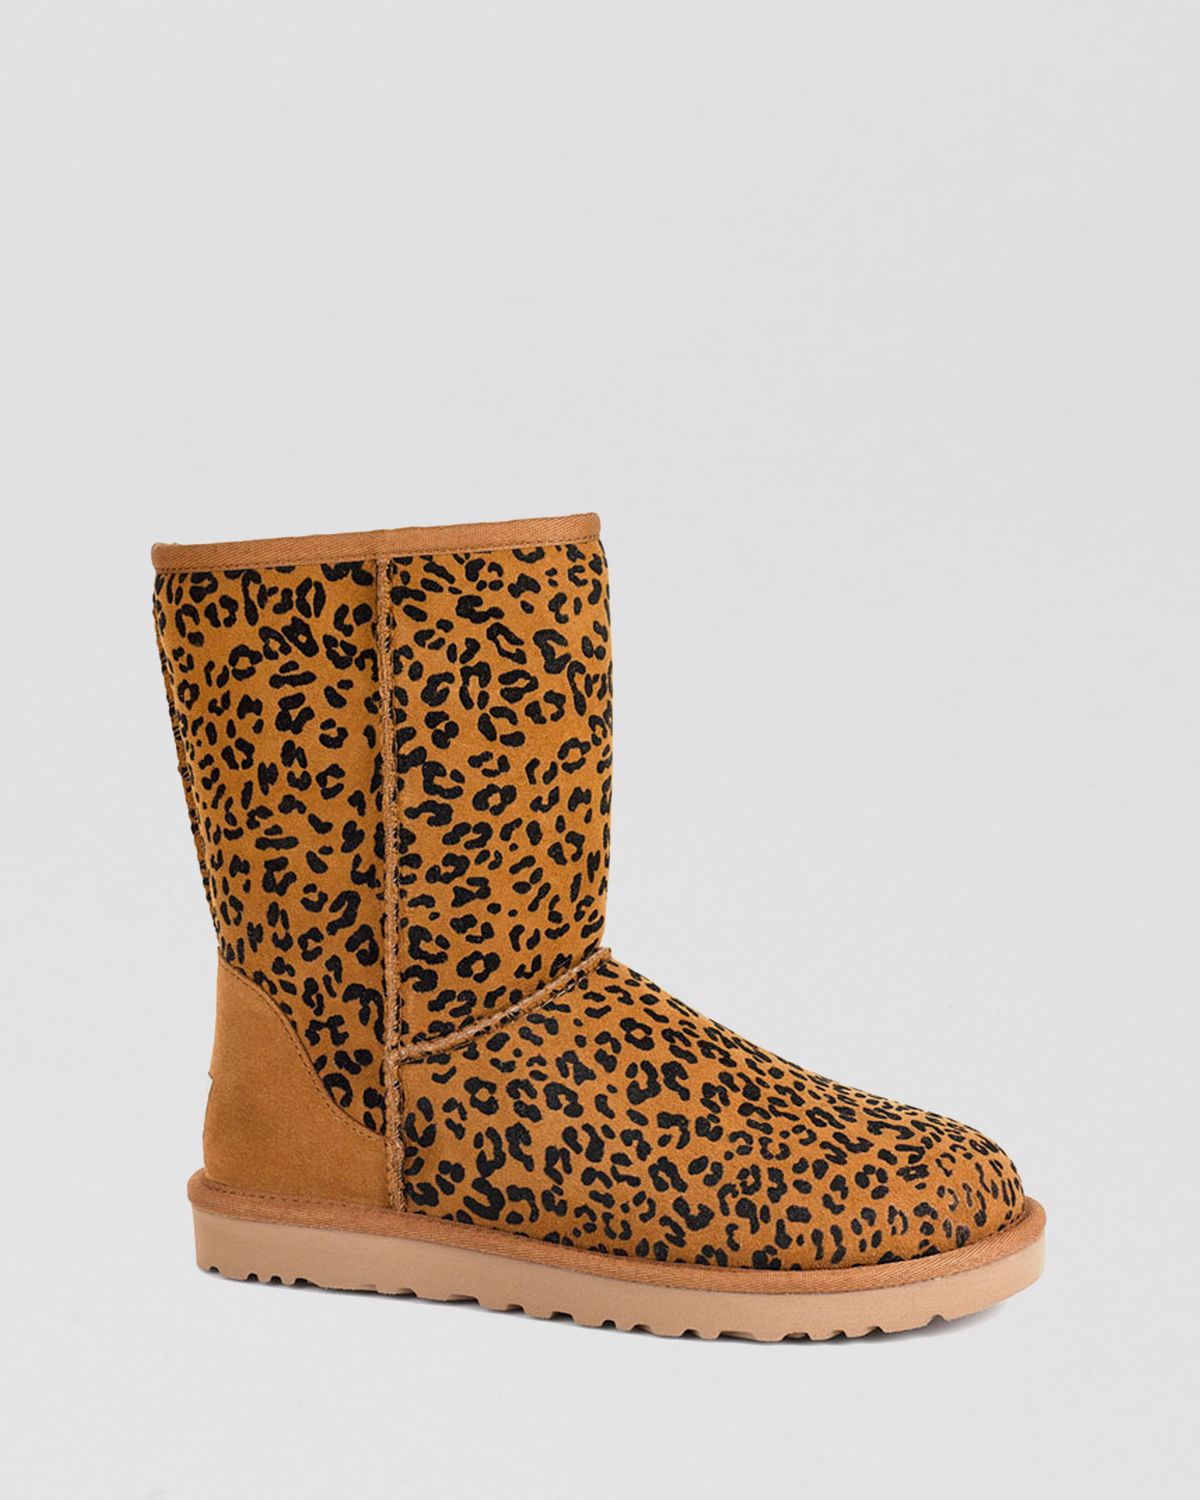 ugg boots with leopard print